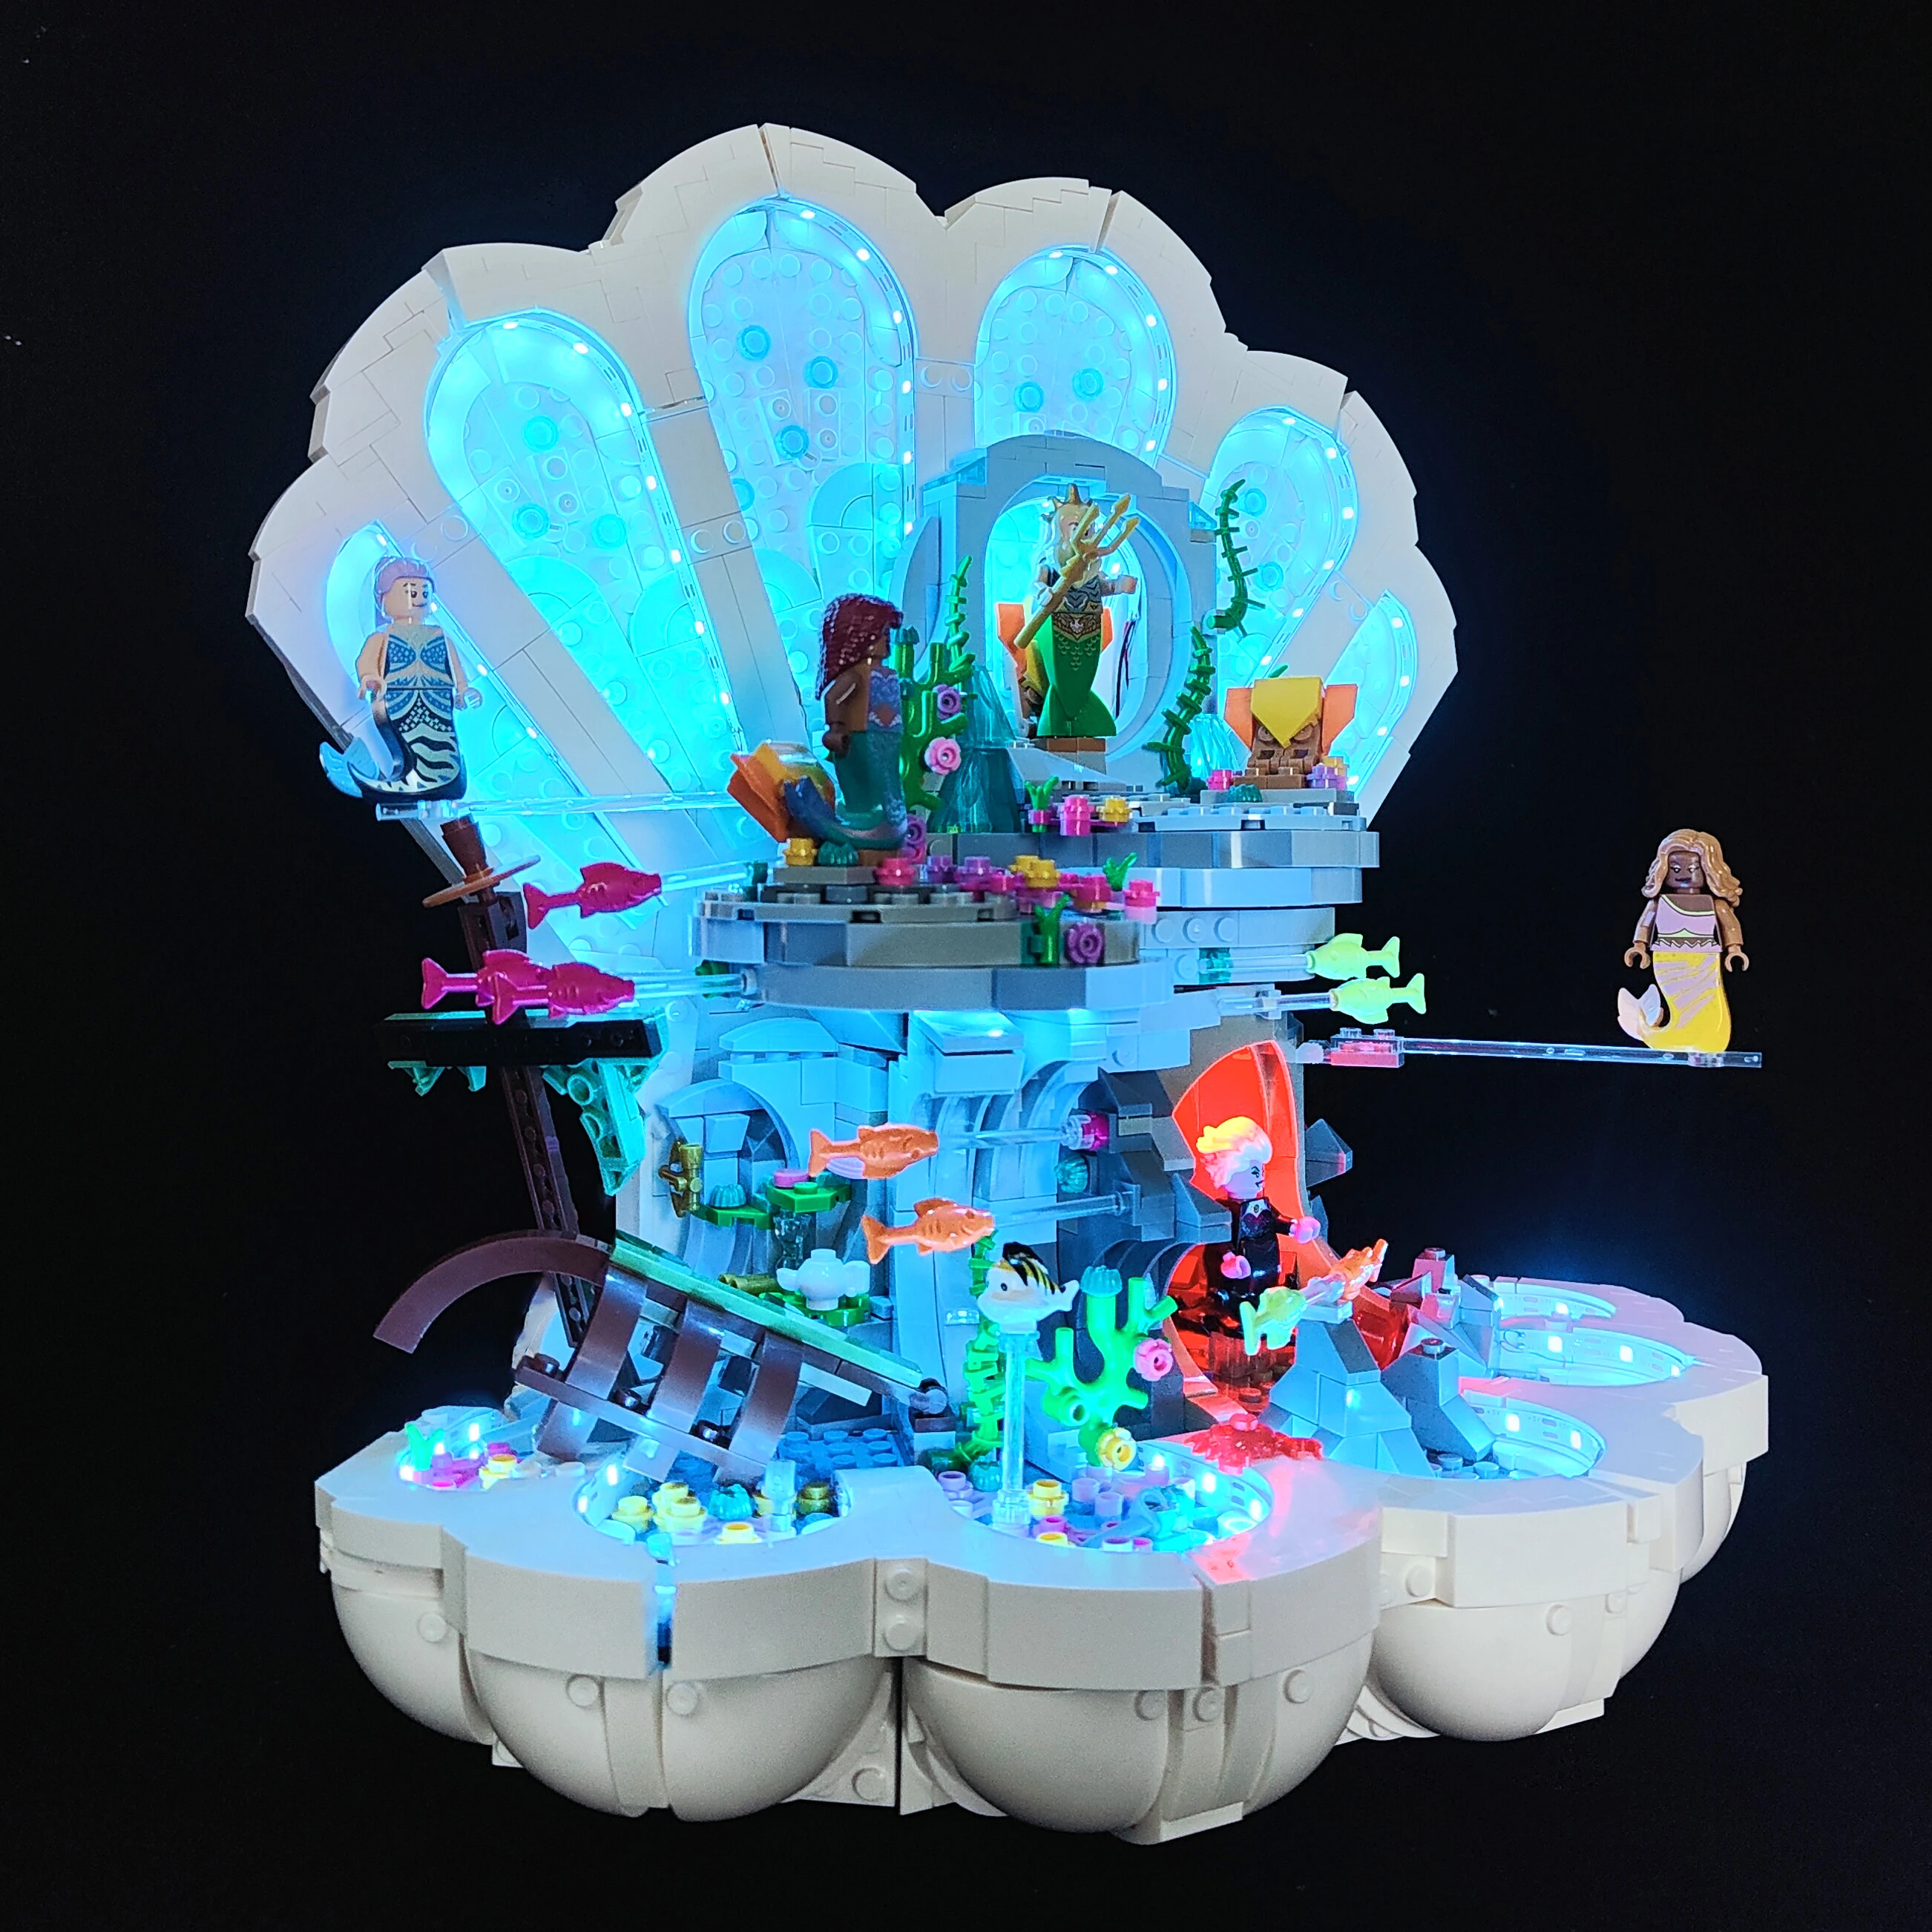 

NEW 2023 Creative Fairy Tale Mermaid Royal Clamshell Building Blocks Princess Palace 43225 Toys For Girls Kids Gifts 1808pcs